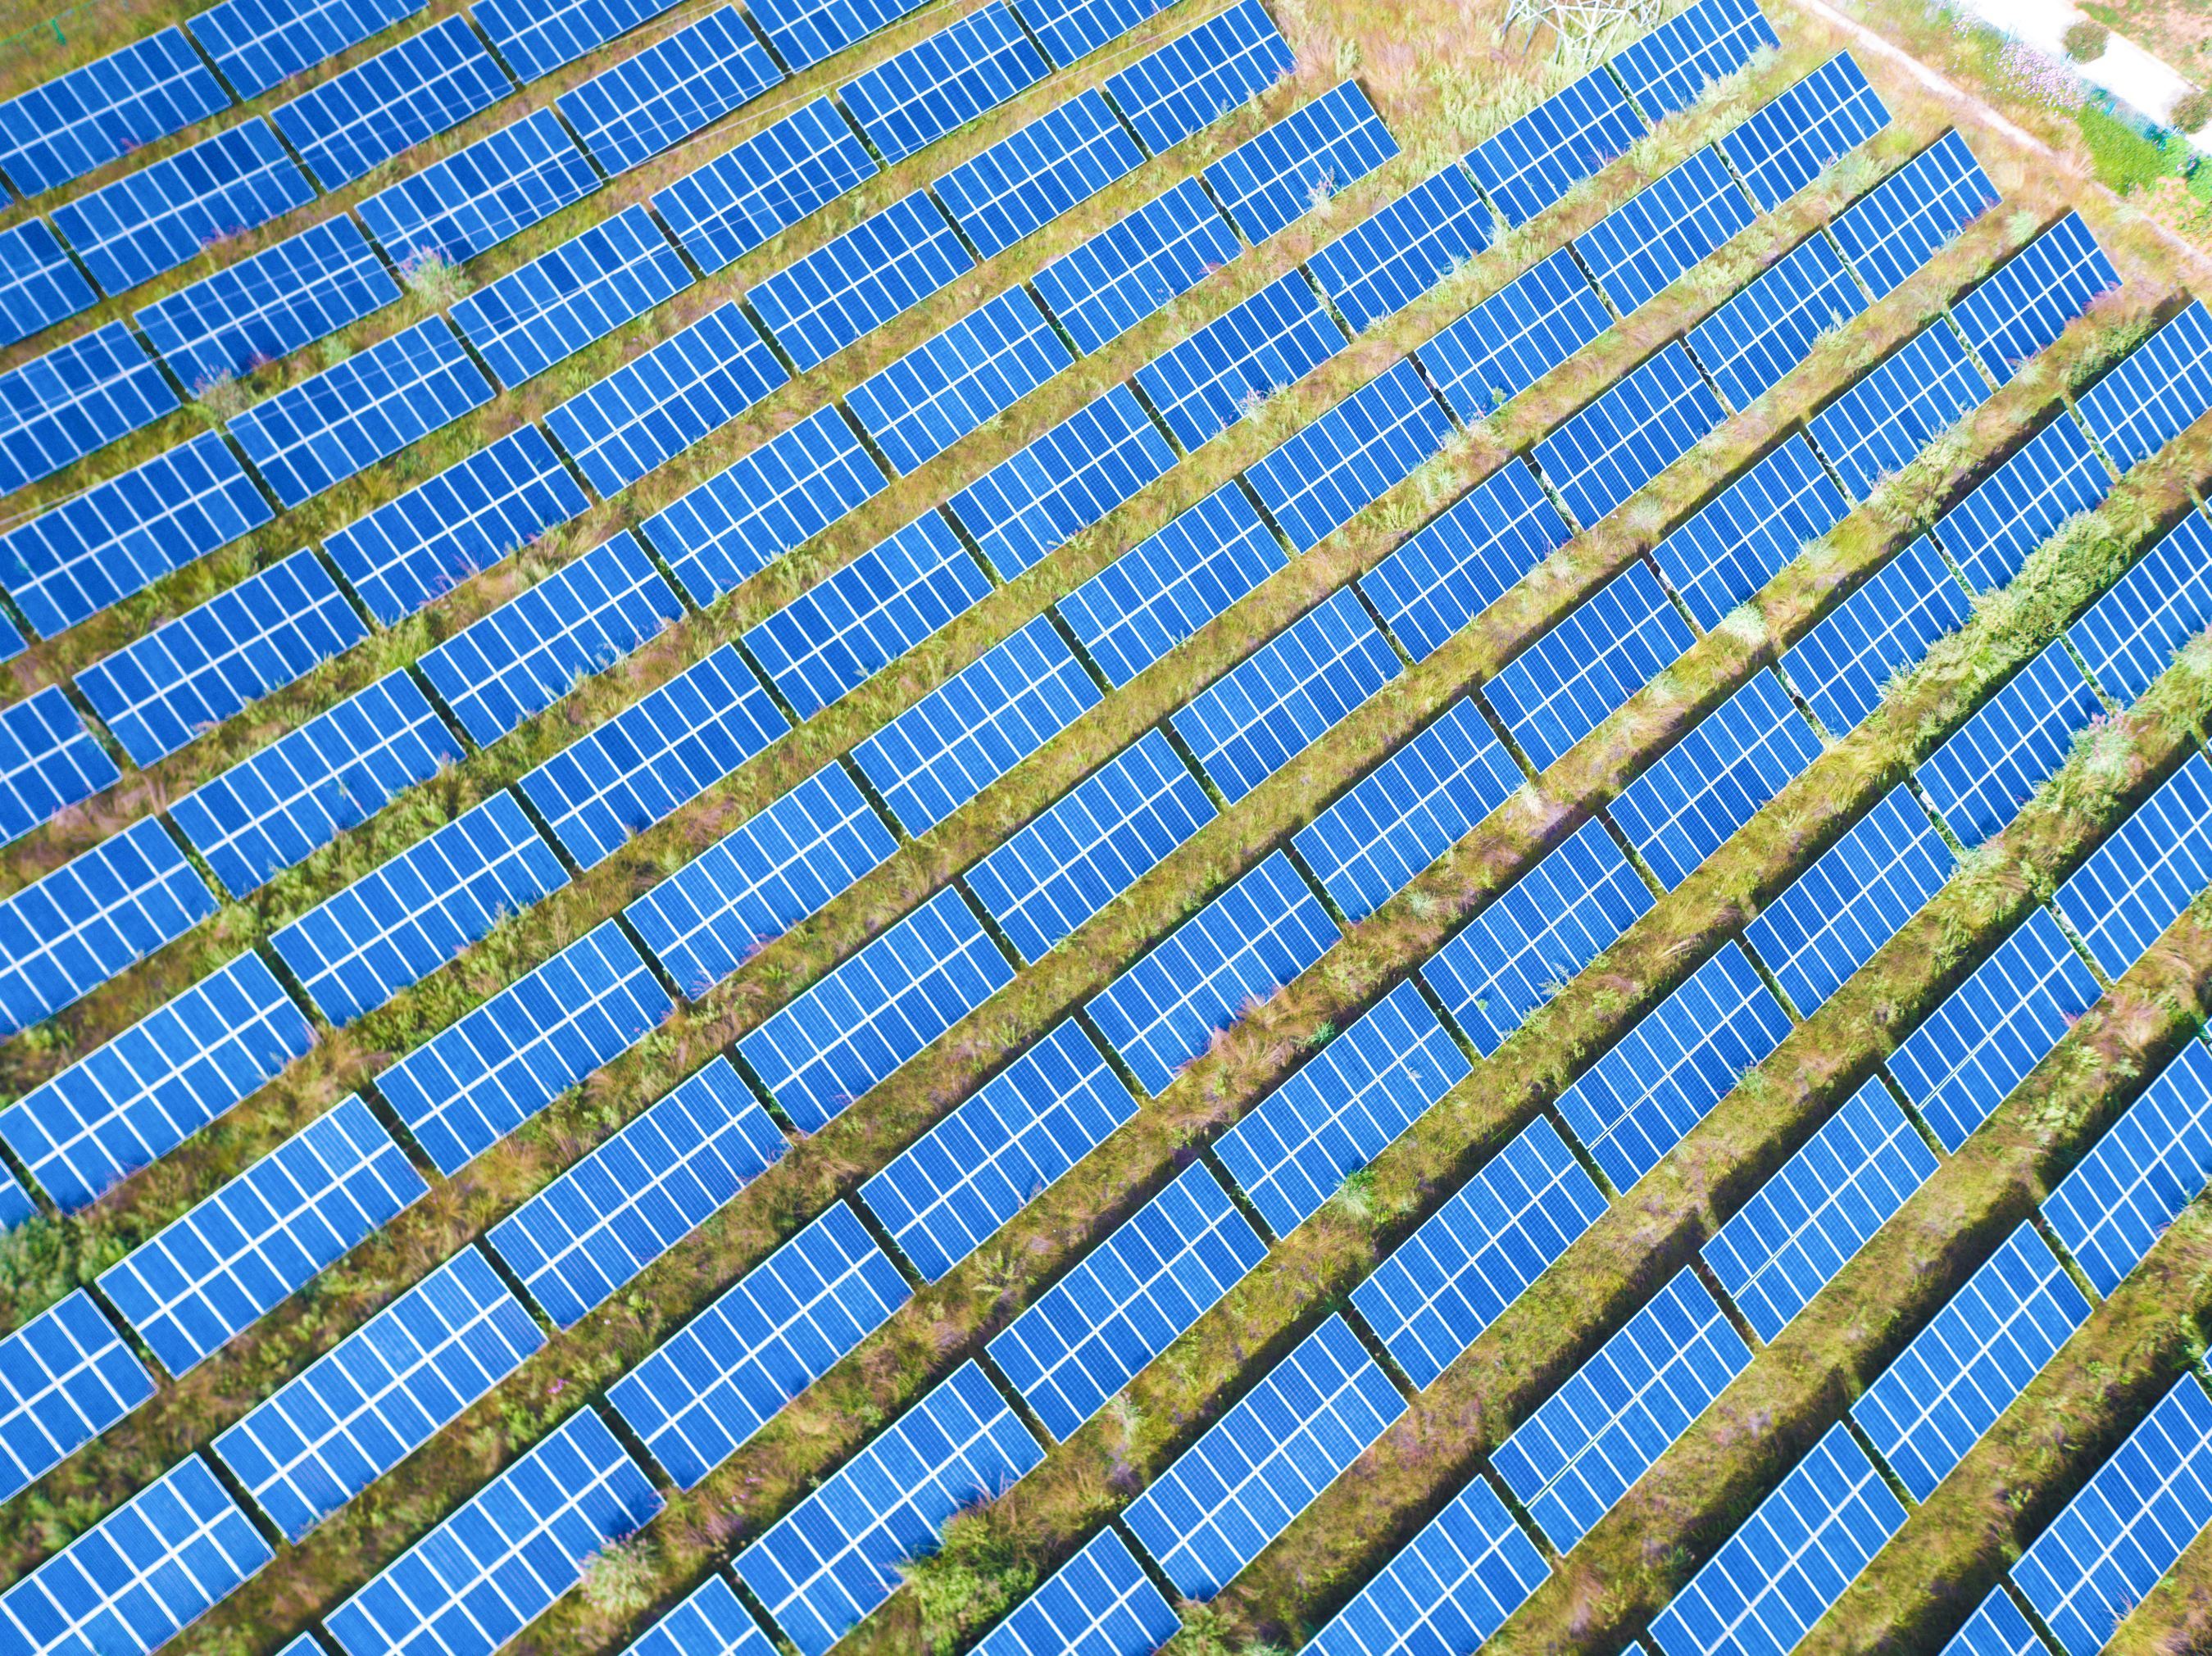 Eryuan photovoltaic project